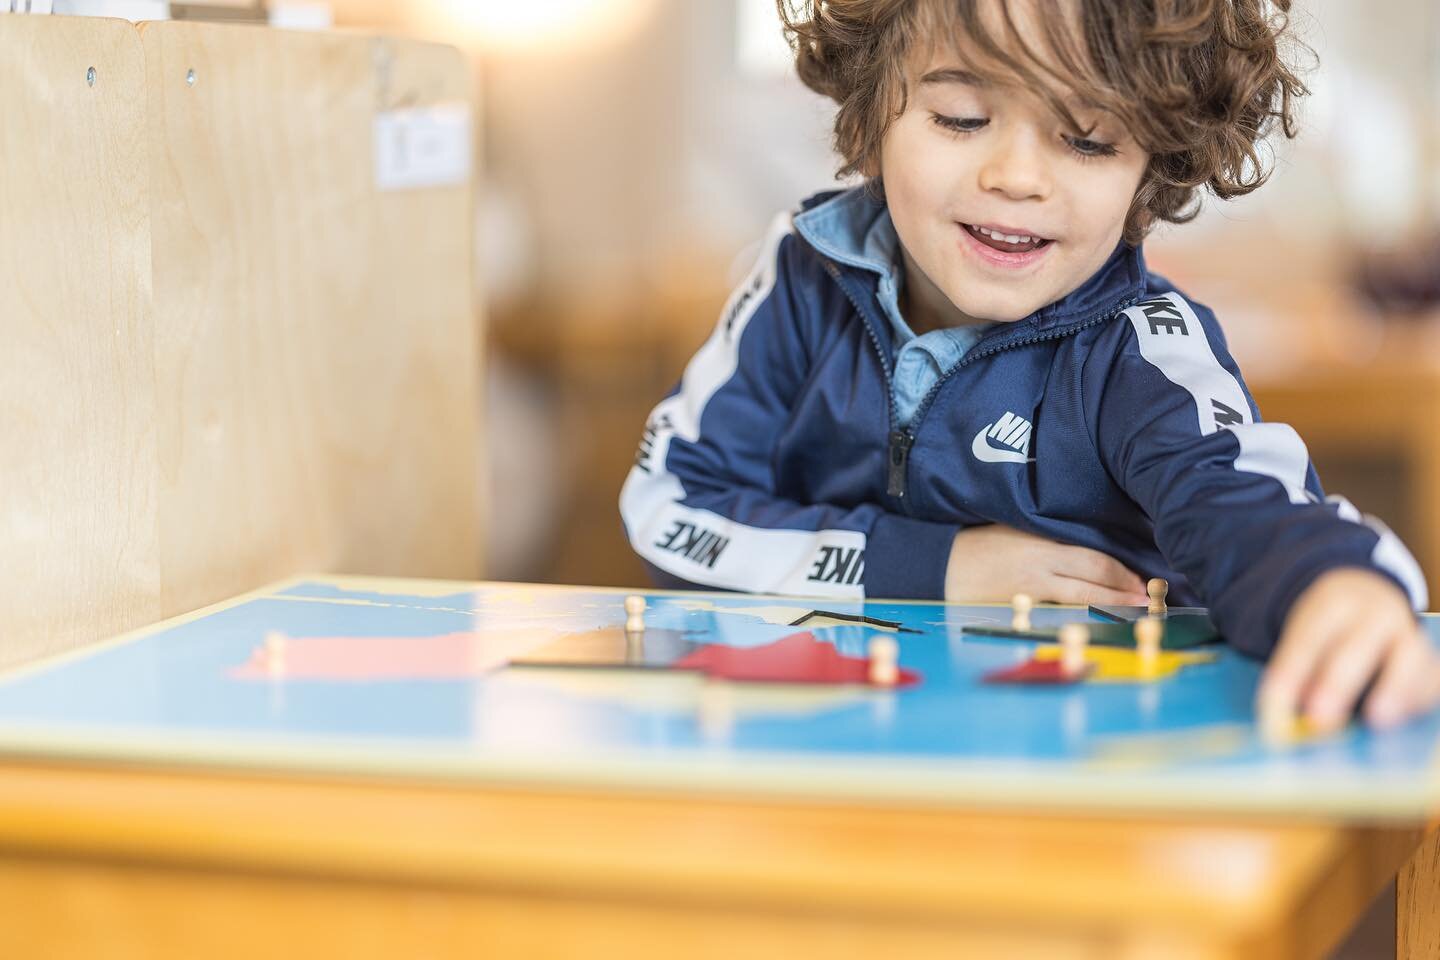 The gift of the Montessori education experience is priceless 📚The @thechildrenshouseatx is currently accepting applications for the 2024-2025 school year. Enrollment starts in January! 📸 @rosslemania #montessoriaustin #atxmontessori #montessoriclas